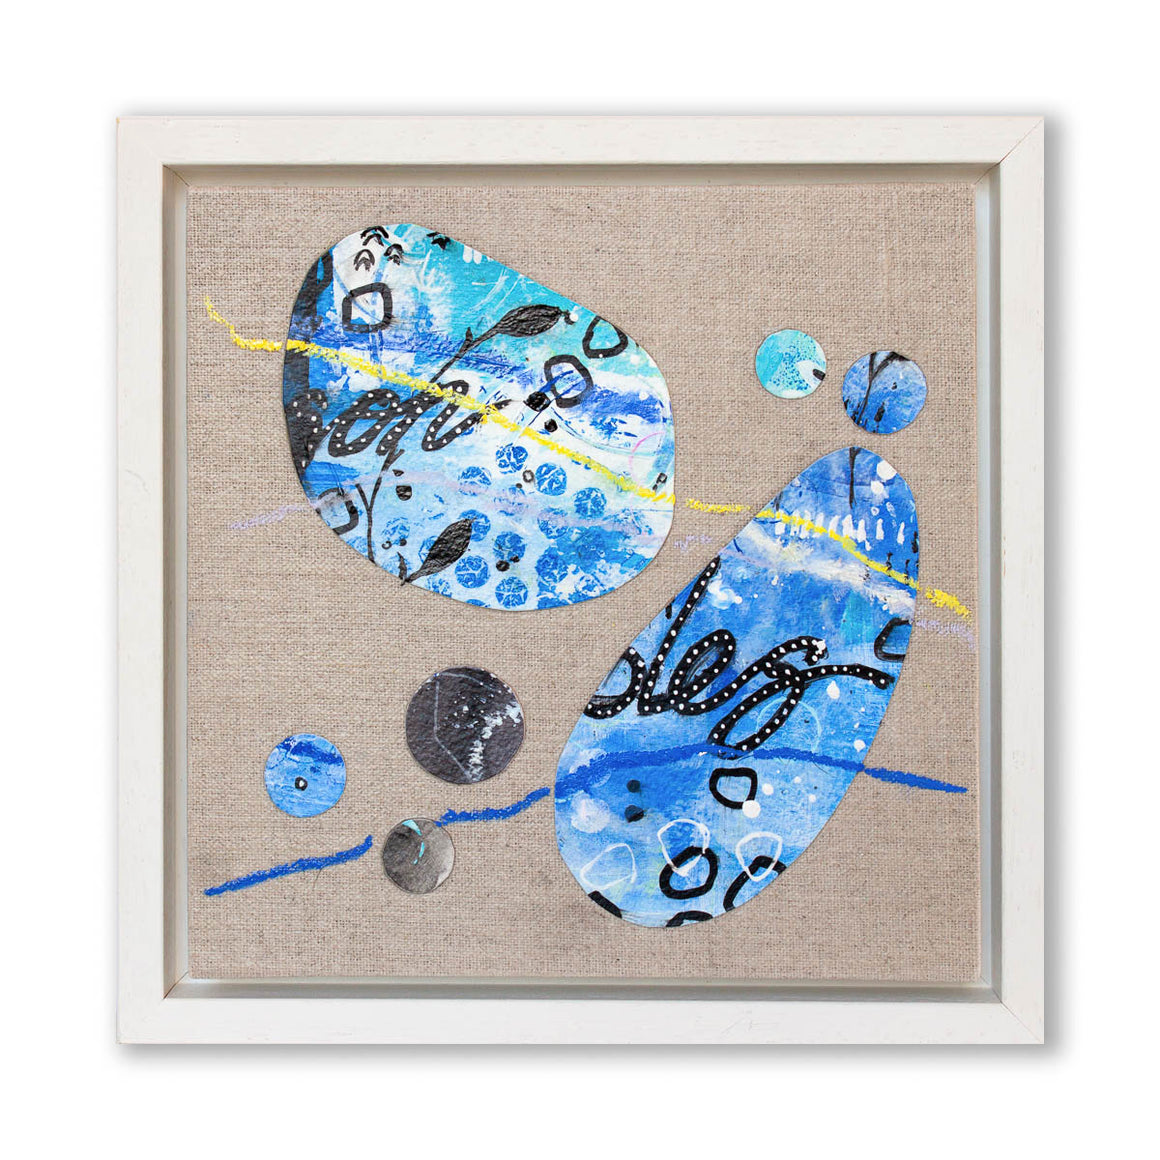 Safe on your shore |  Framed Pebble Painting on 20cm sq Canvas